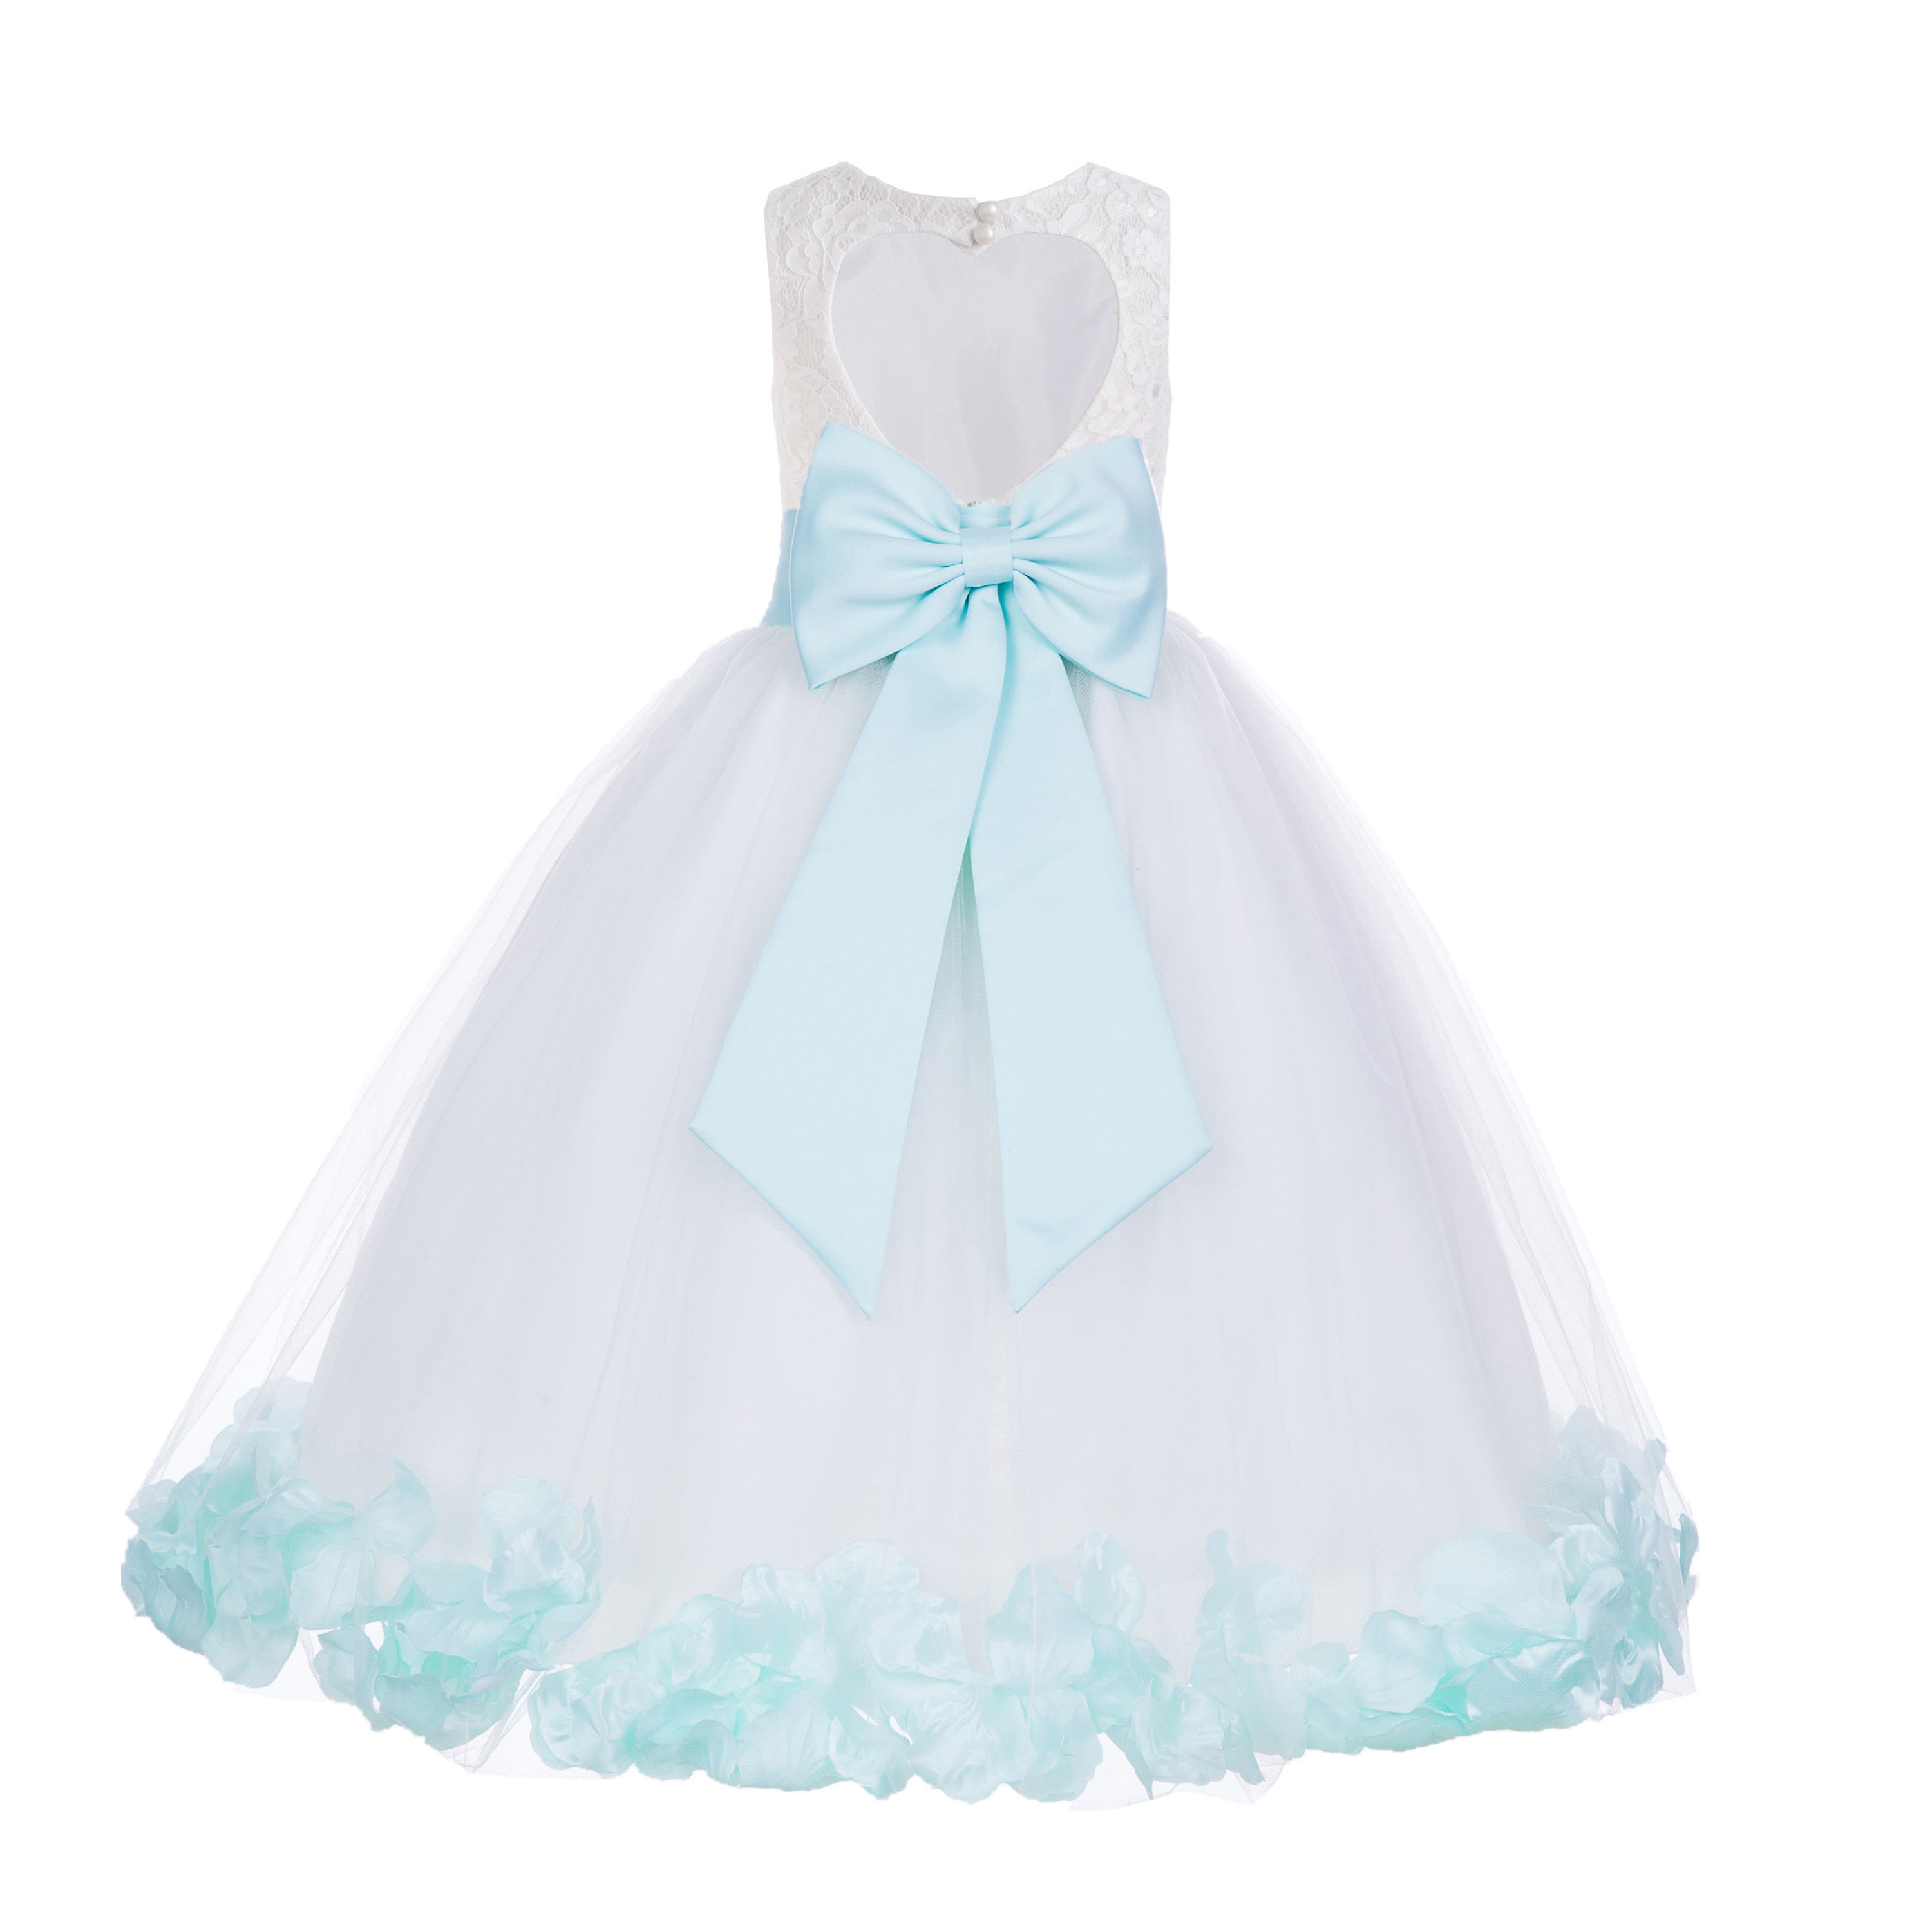 White / Mint Floral Lace Heart Cutout Flower Girl Dress with Petals 185T